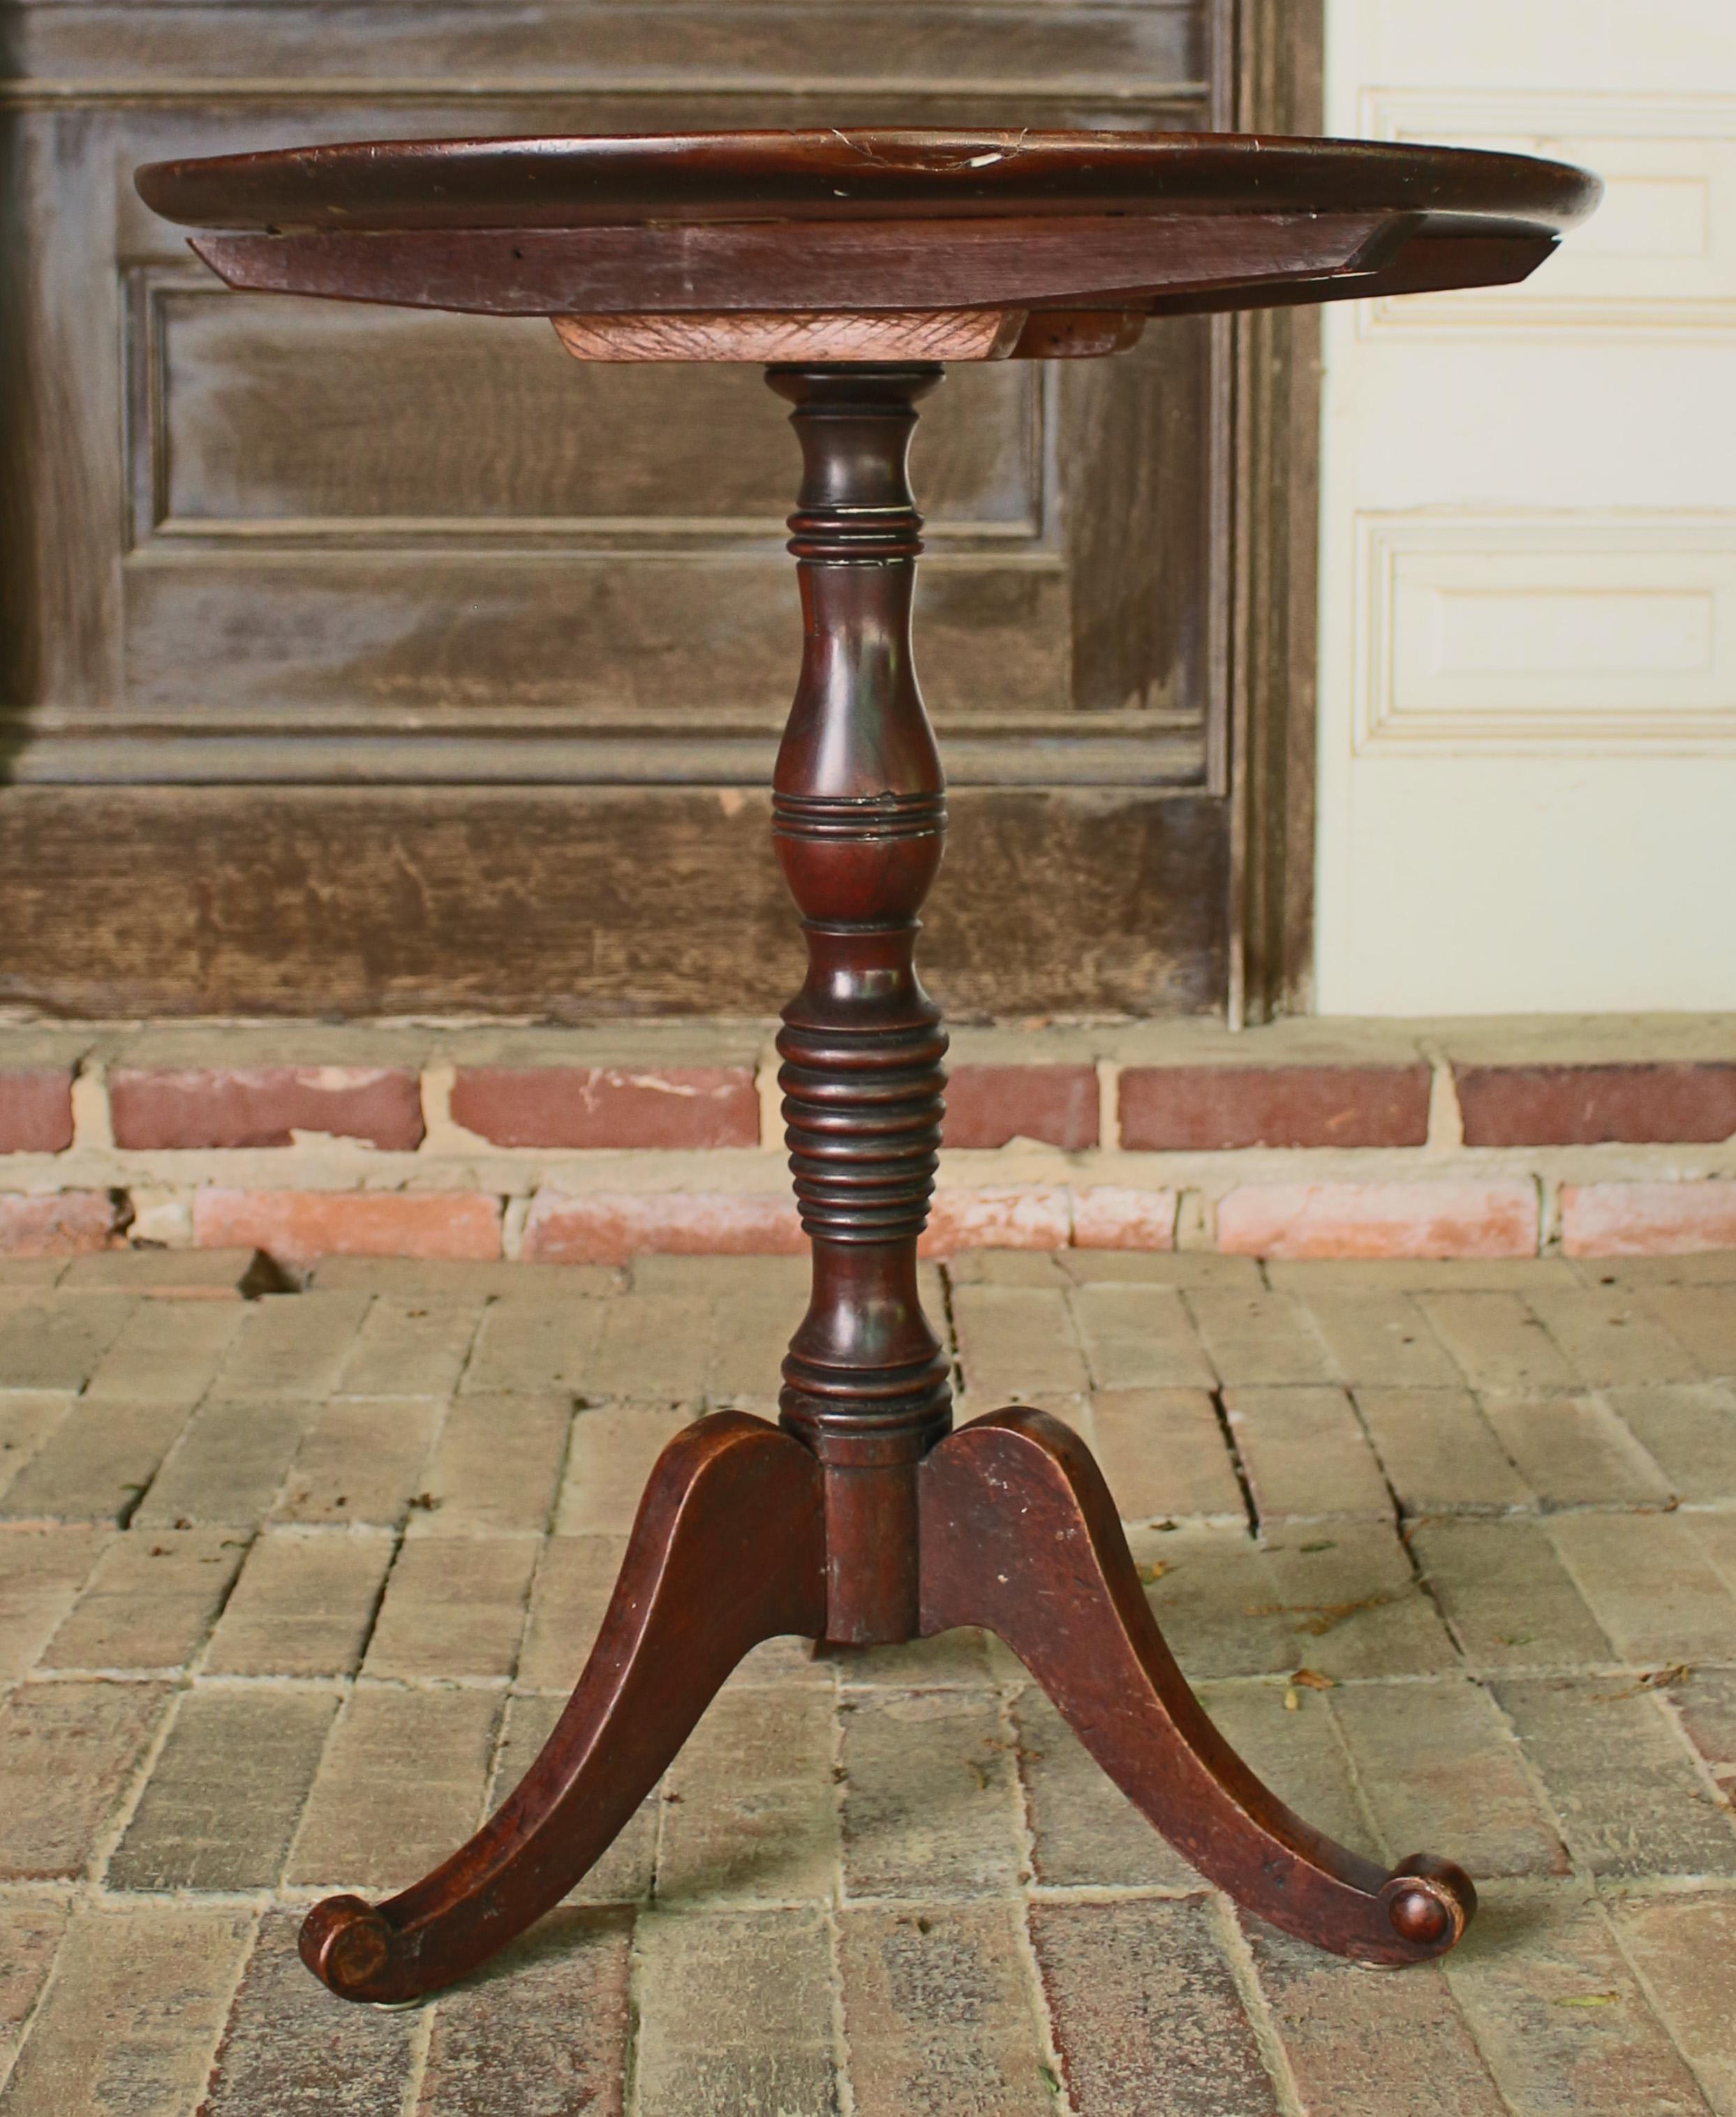 Late George III, c.1830, dish-top mahogany candlestand or small tea table with beehive turned standard raised on flat scrolled legs. Old top splits and repairs. Flipping mechanism partially restored. Split by one leg repairs. A charming, well used